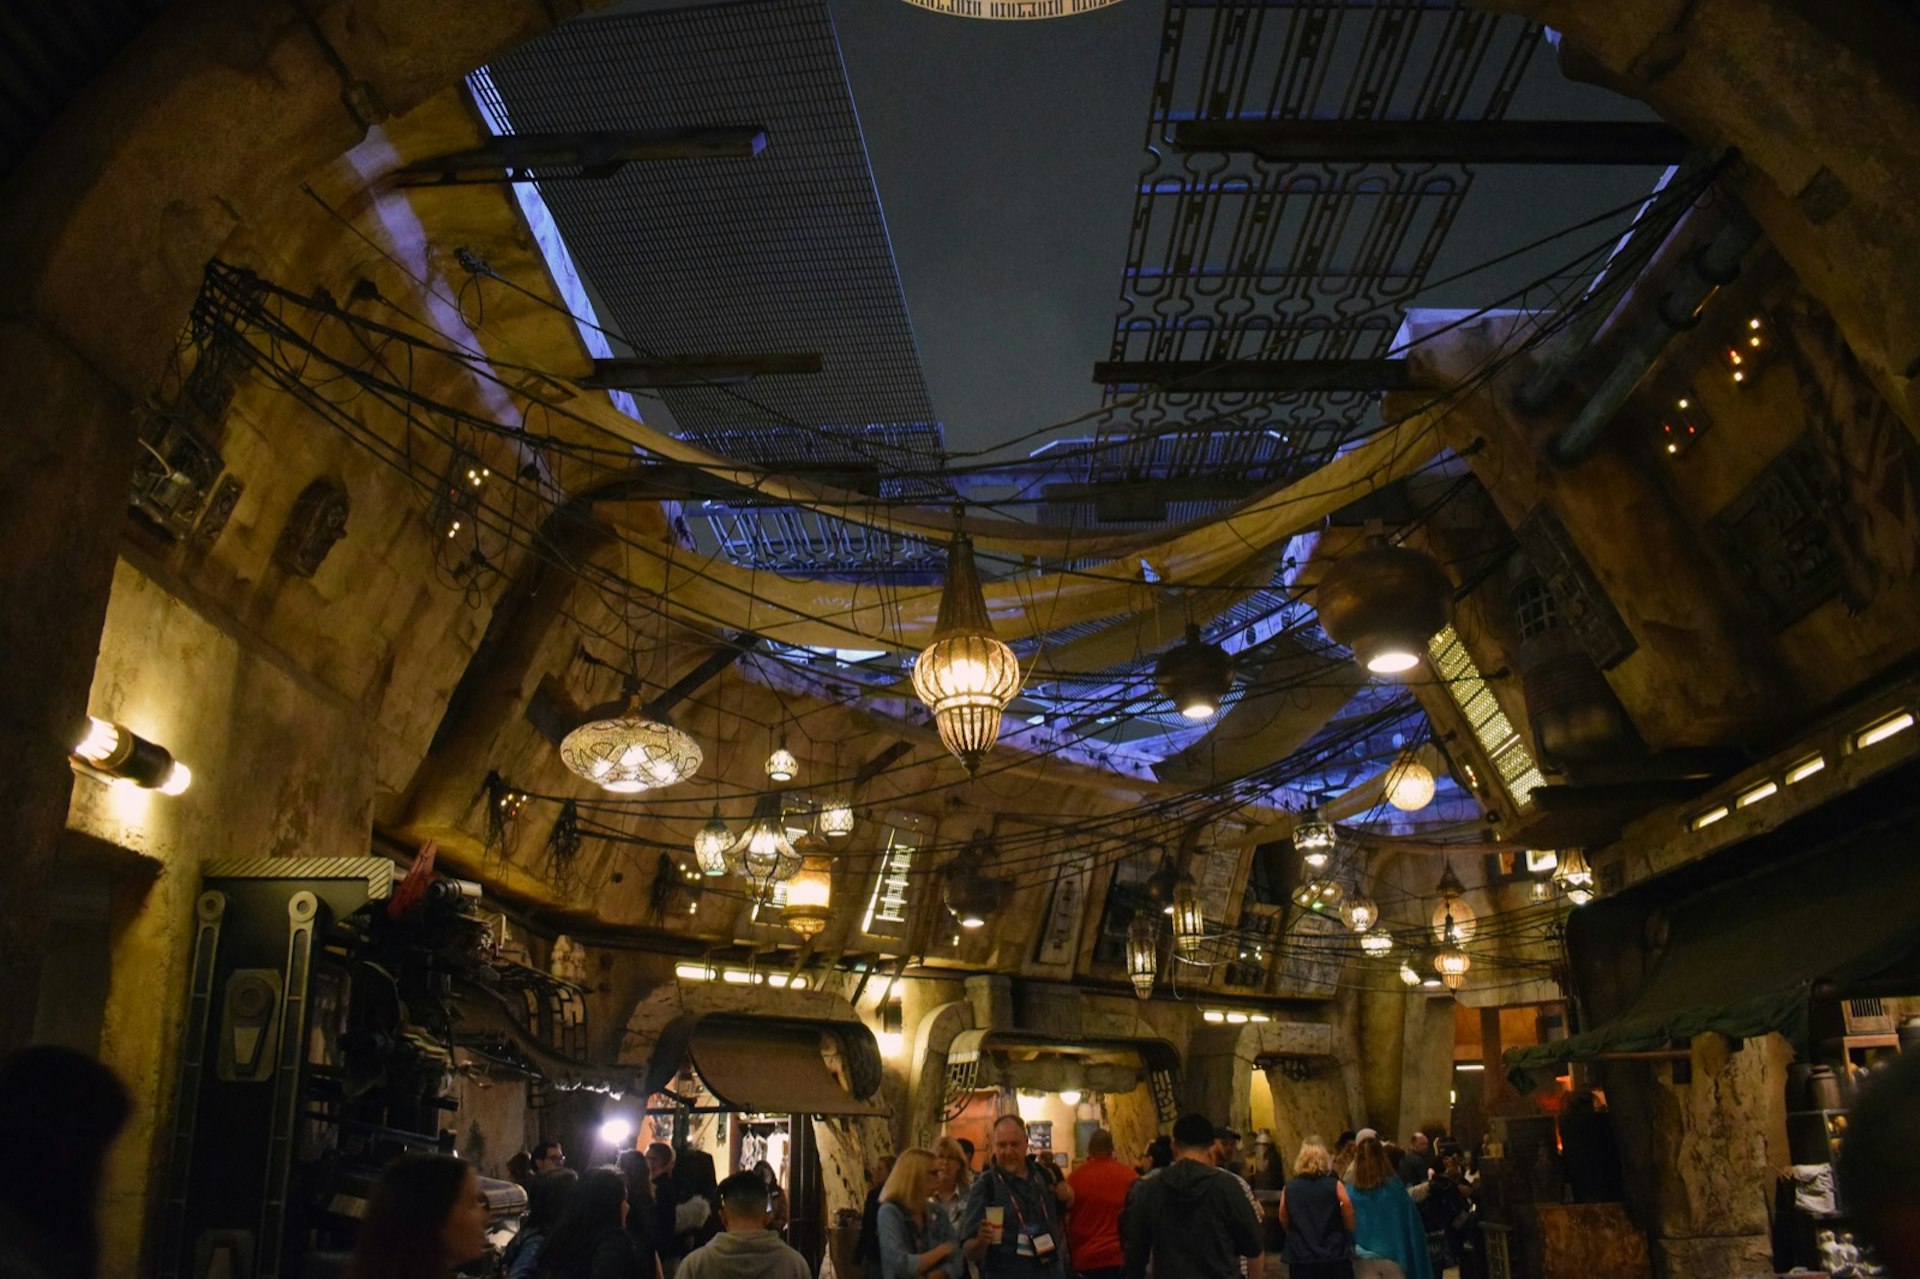 The interior of the Marketplace setting at Star Wars theme park